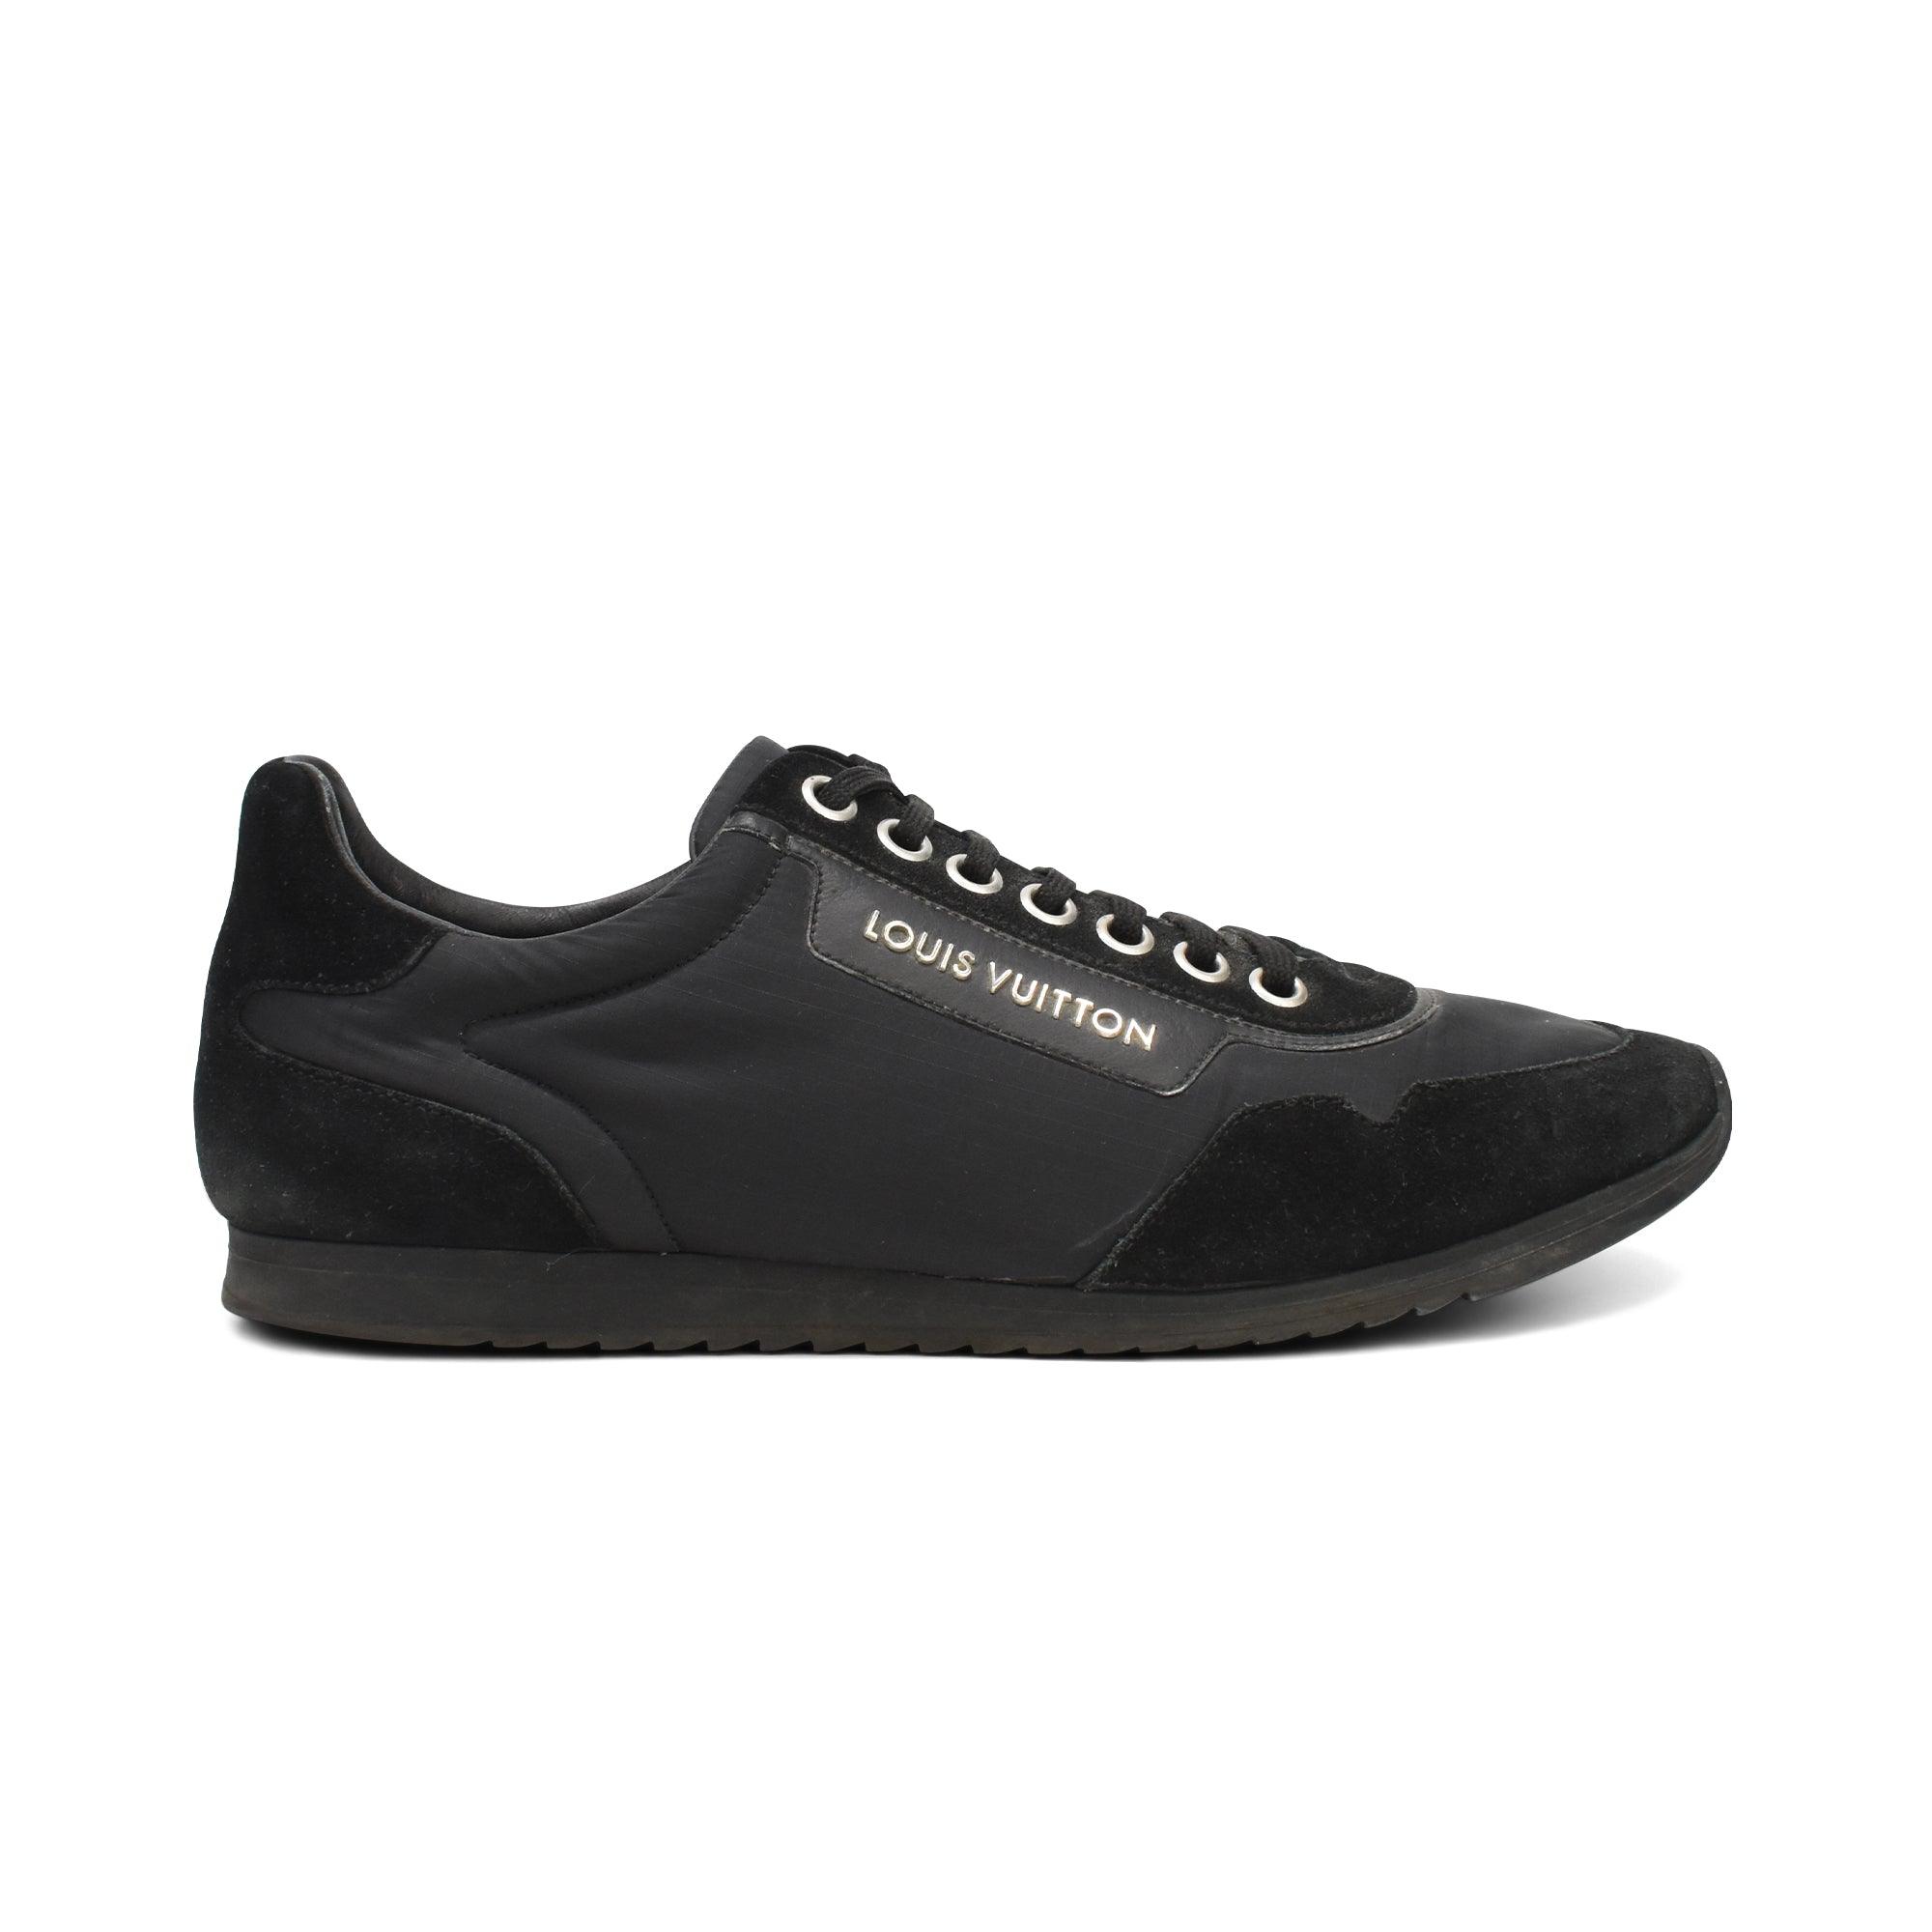 Louis Vuitton Sneakers - Men's 10 - Fashionably Yours